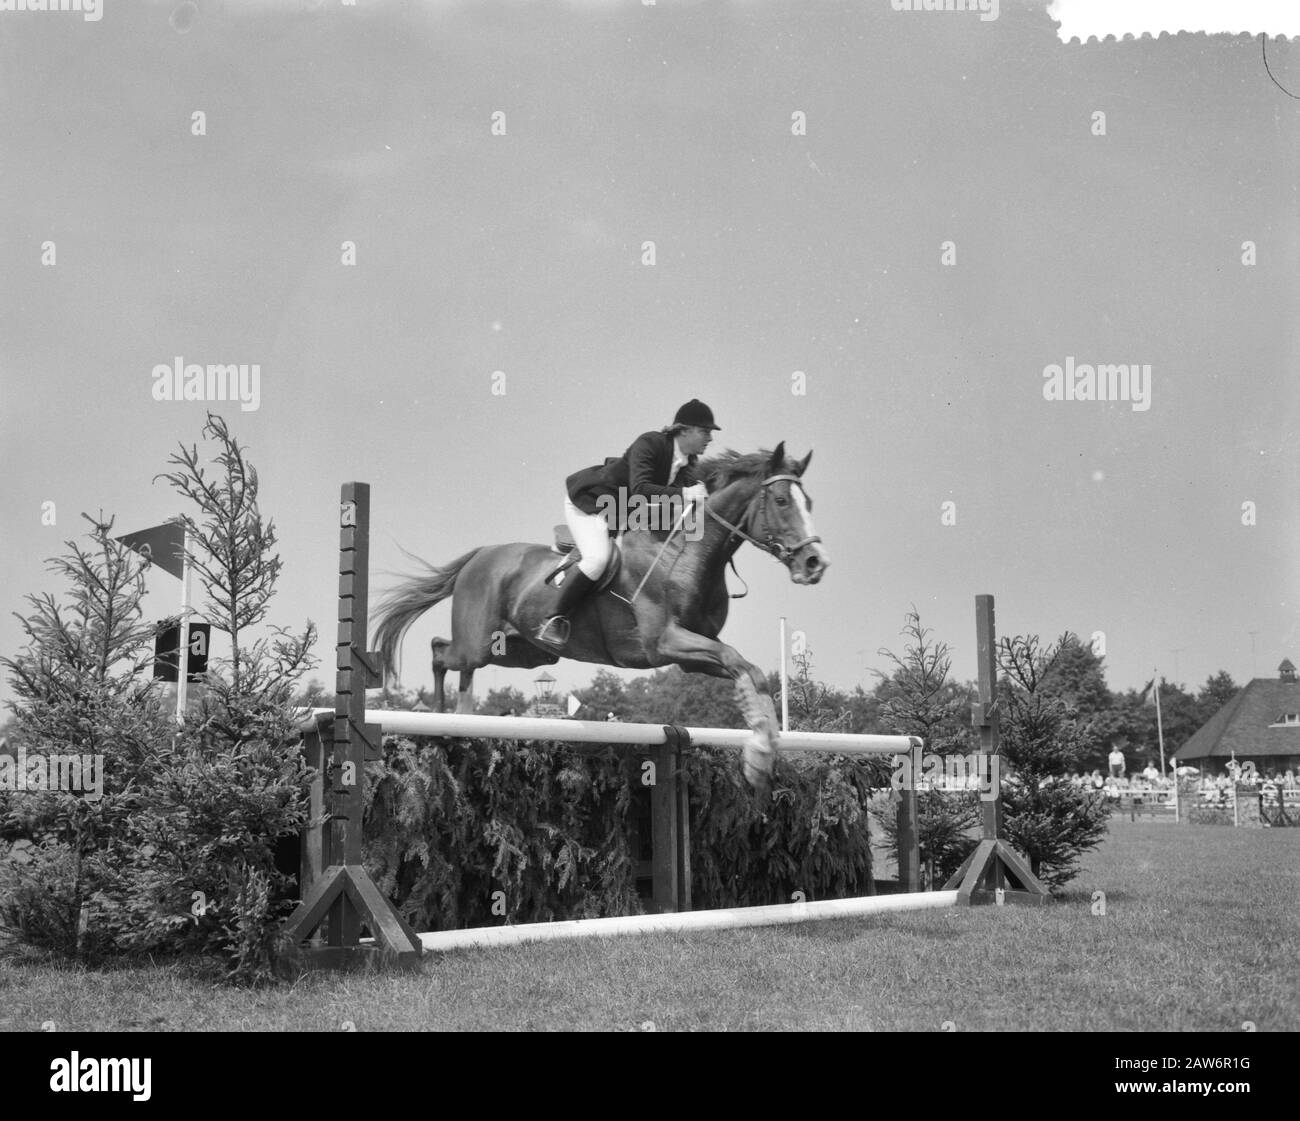 Princess Armgard on International Concours Hippique Date: June 24, 1960 Keywords: competitions Person Name: Armgard, Princess of Lippe-Biesterfeld Stock Photo